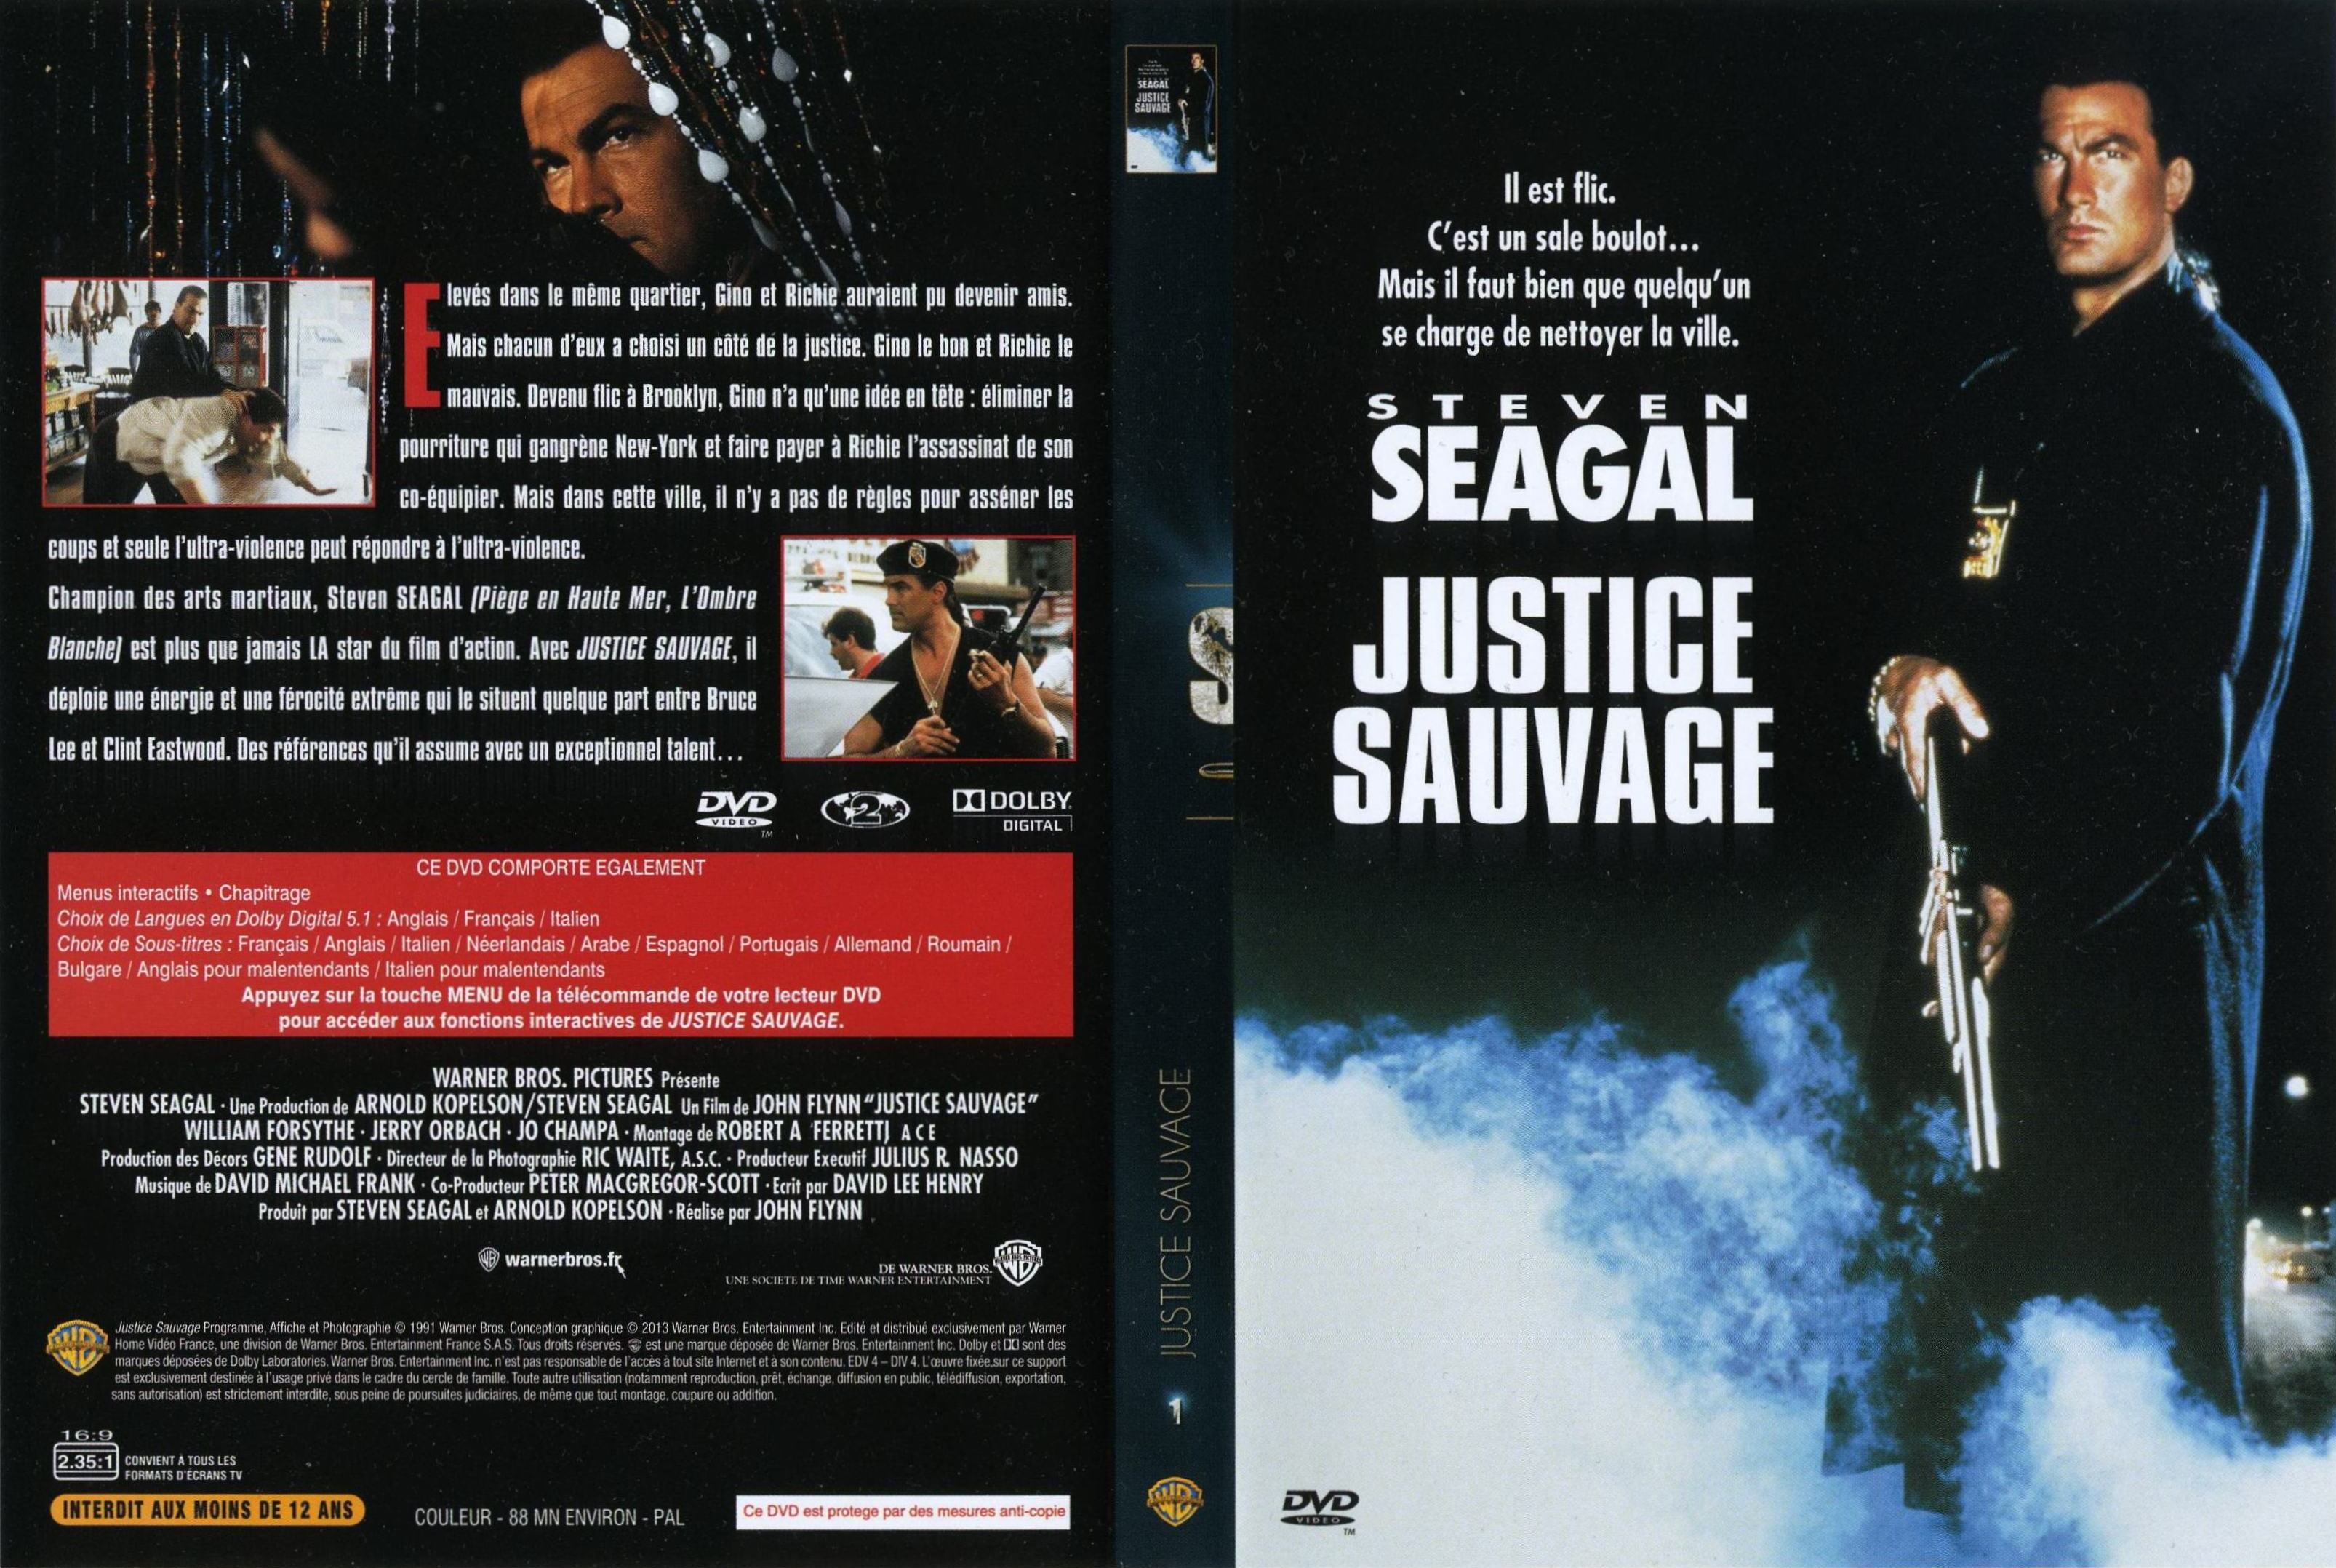 Jaquette DVD Justice Sauvage v3